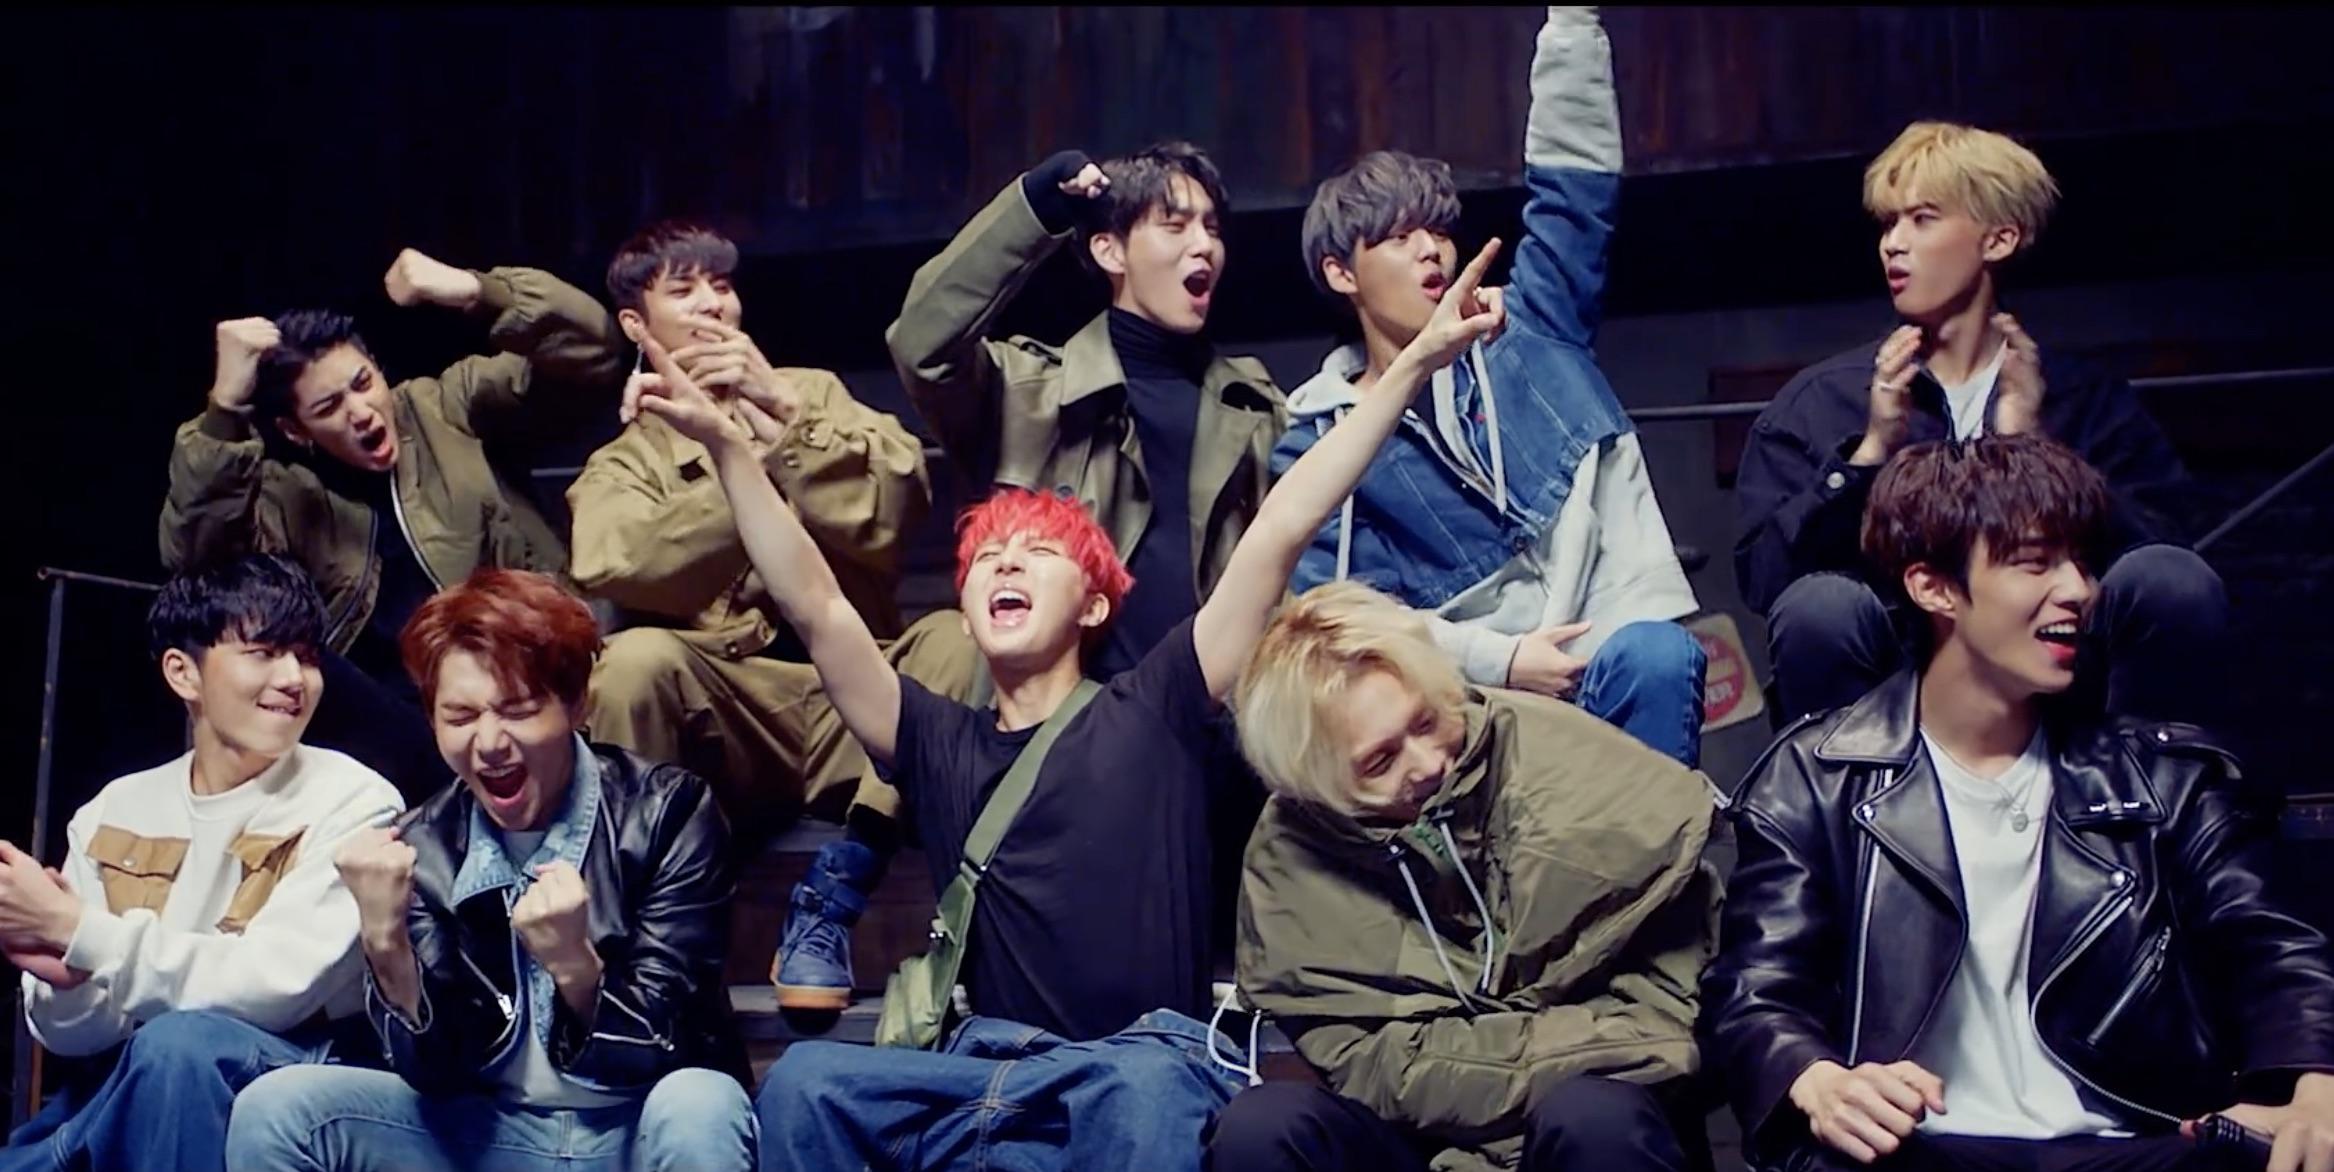 Watch: Pentagon Release New Music Video For “Runaway”